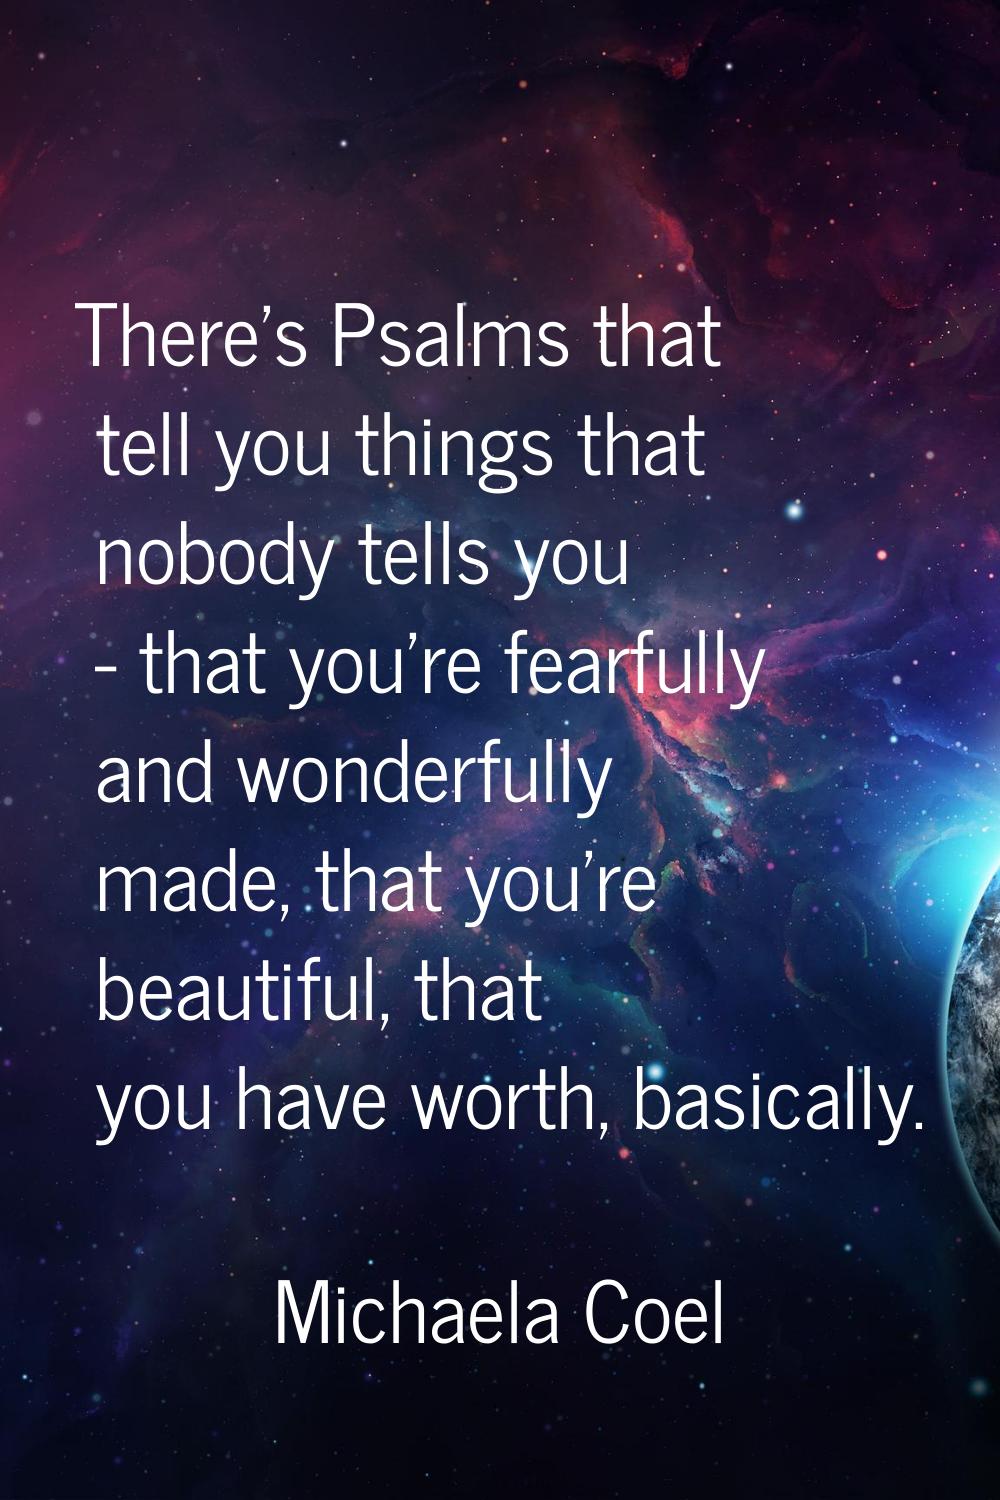 There's Psalms that tell you things that nobody tells you - that you're fearfully and wonderfully m